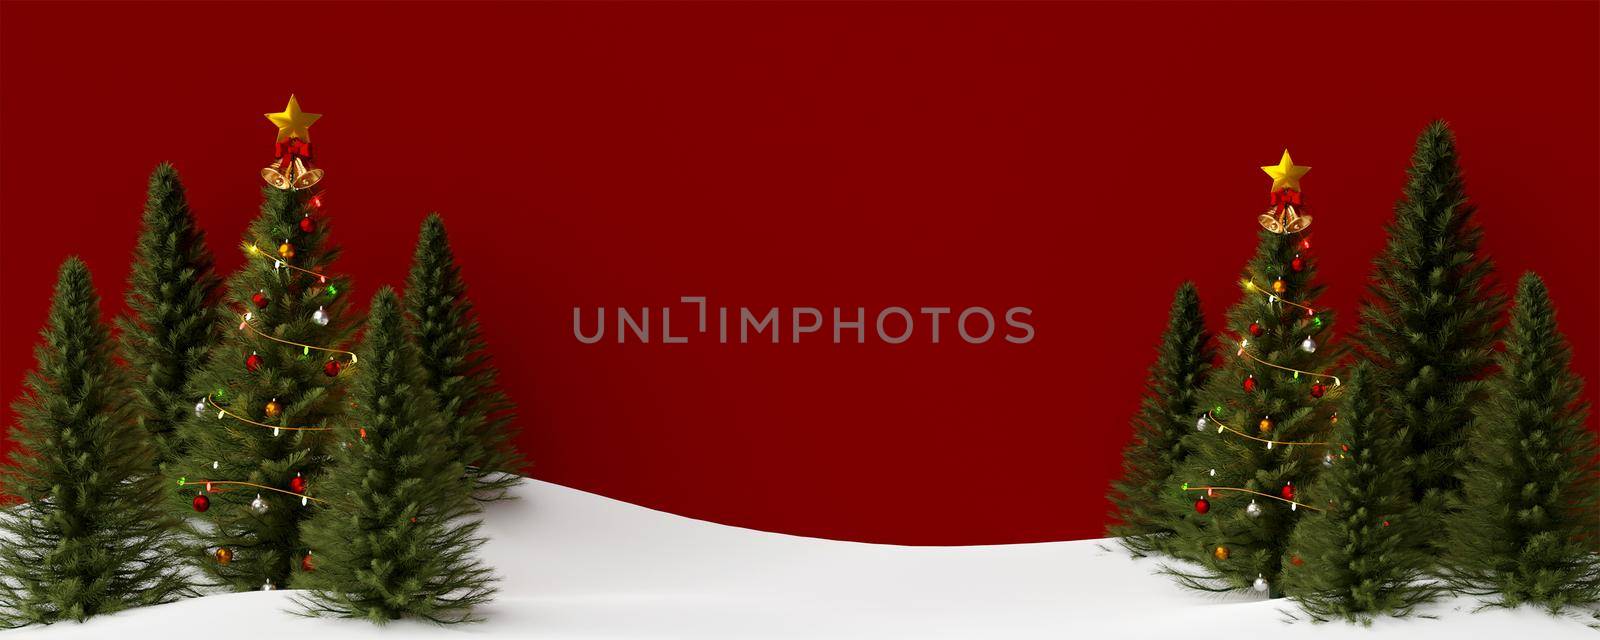 Christmas background, Christmas tree on snow ground with red background, 3d illustration